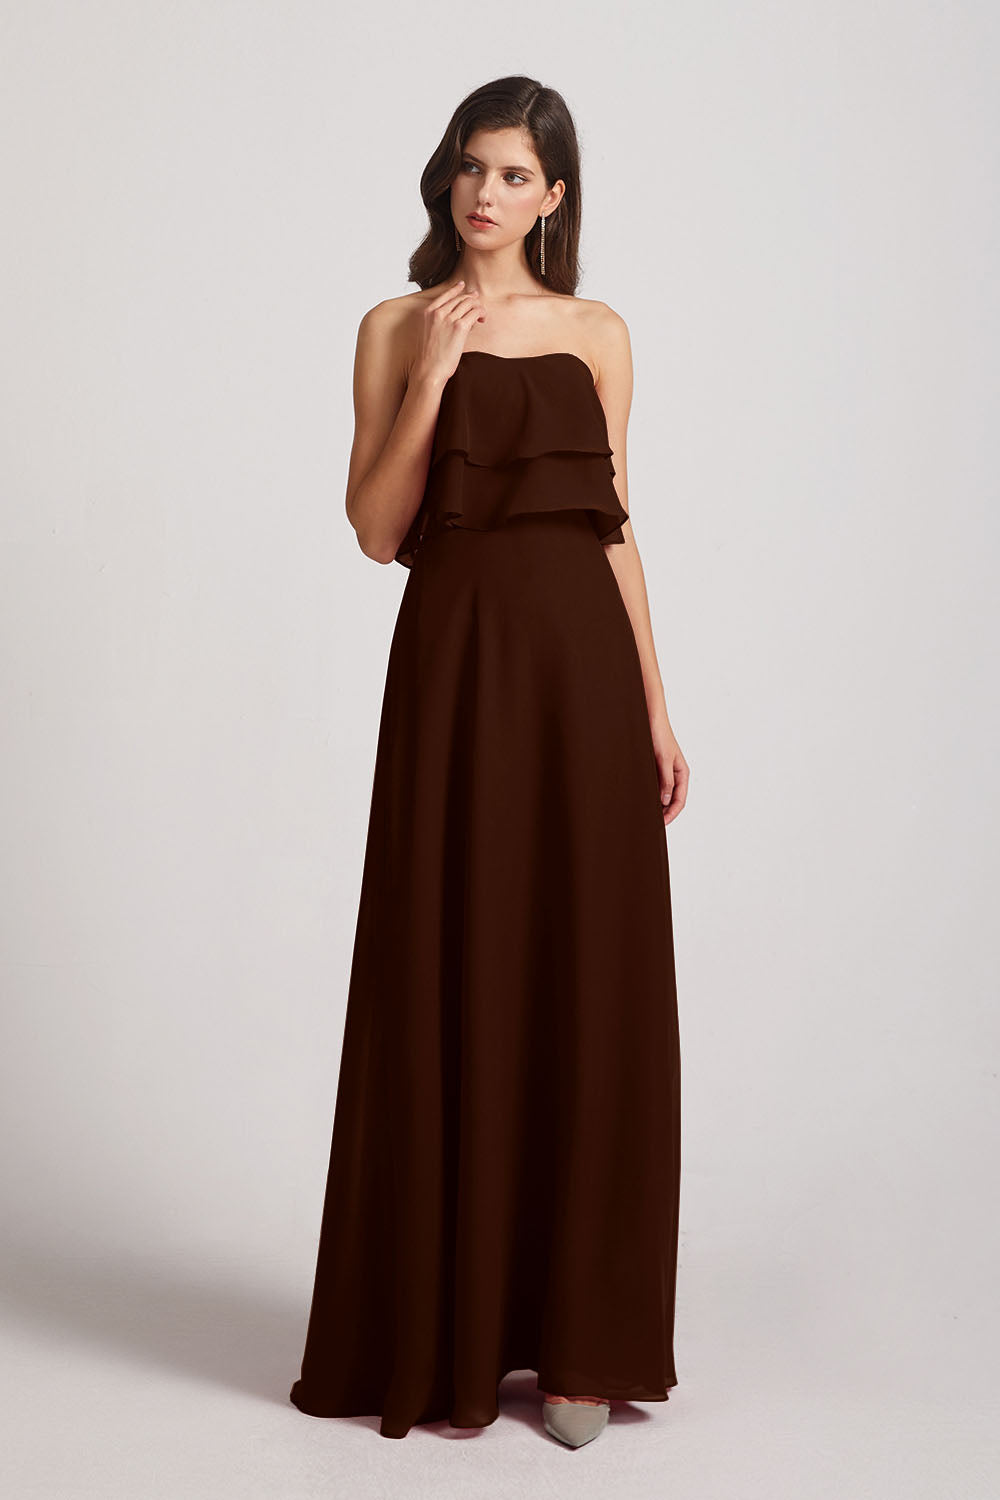 Alfa Bridal Chocolate Strapless Chiffon Bridesmaid Dresses with Tiered Ruffles (AF0086)